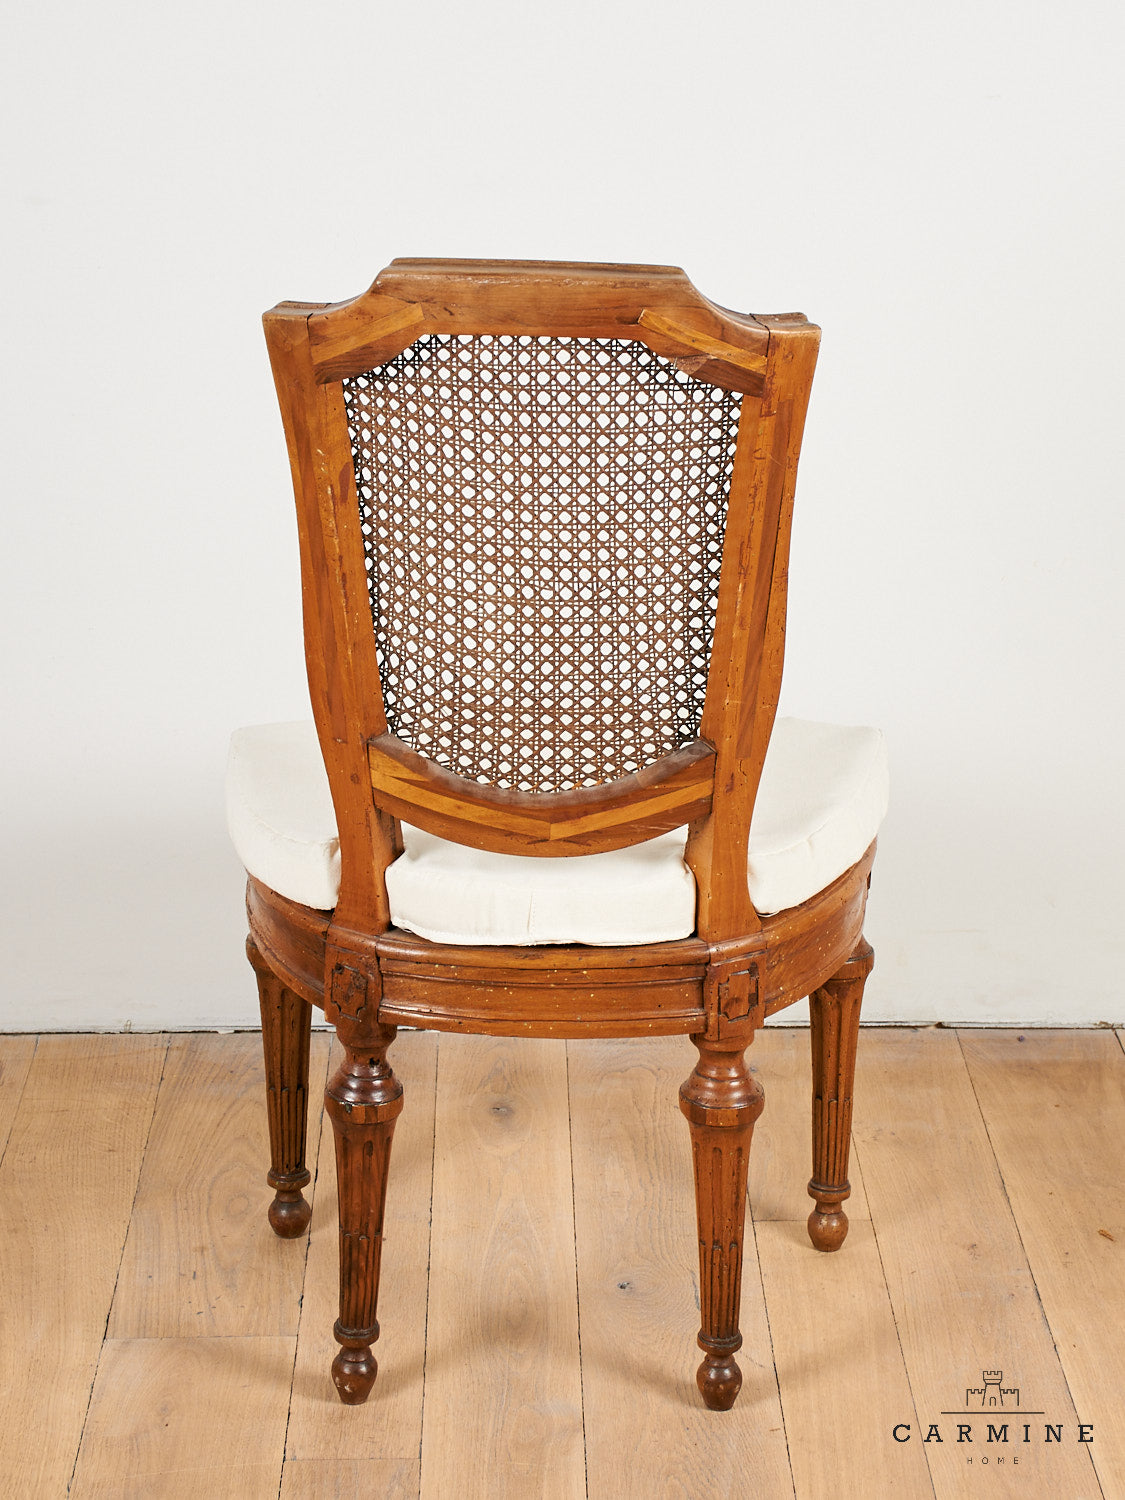 1 woven chair, 18th century with seat cushion